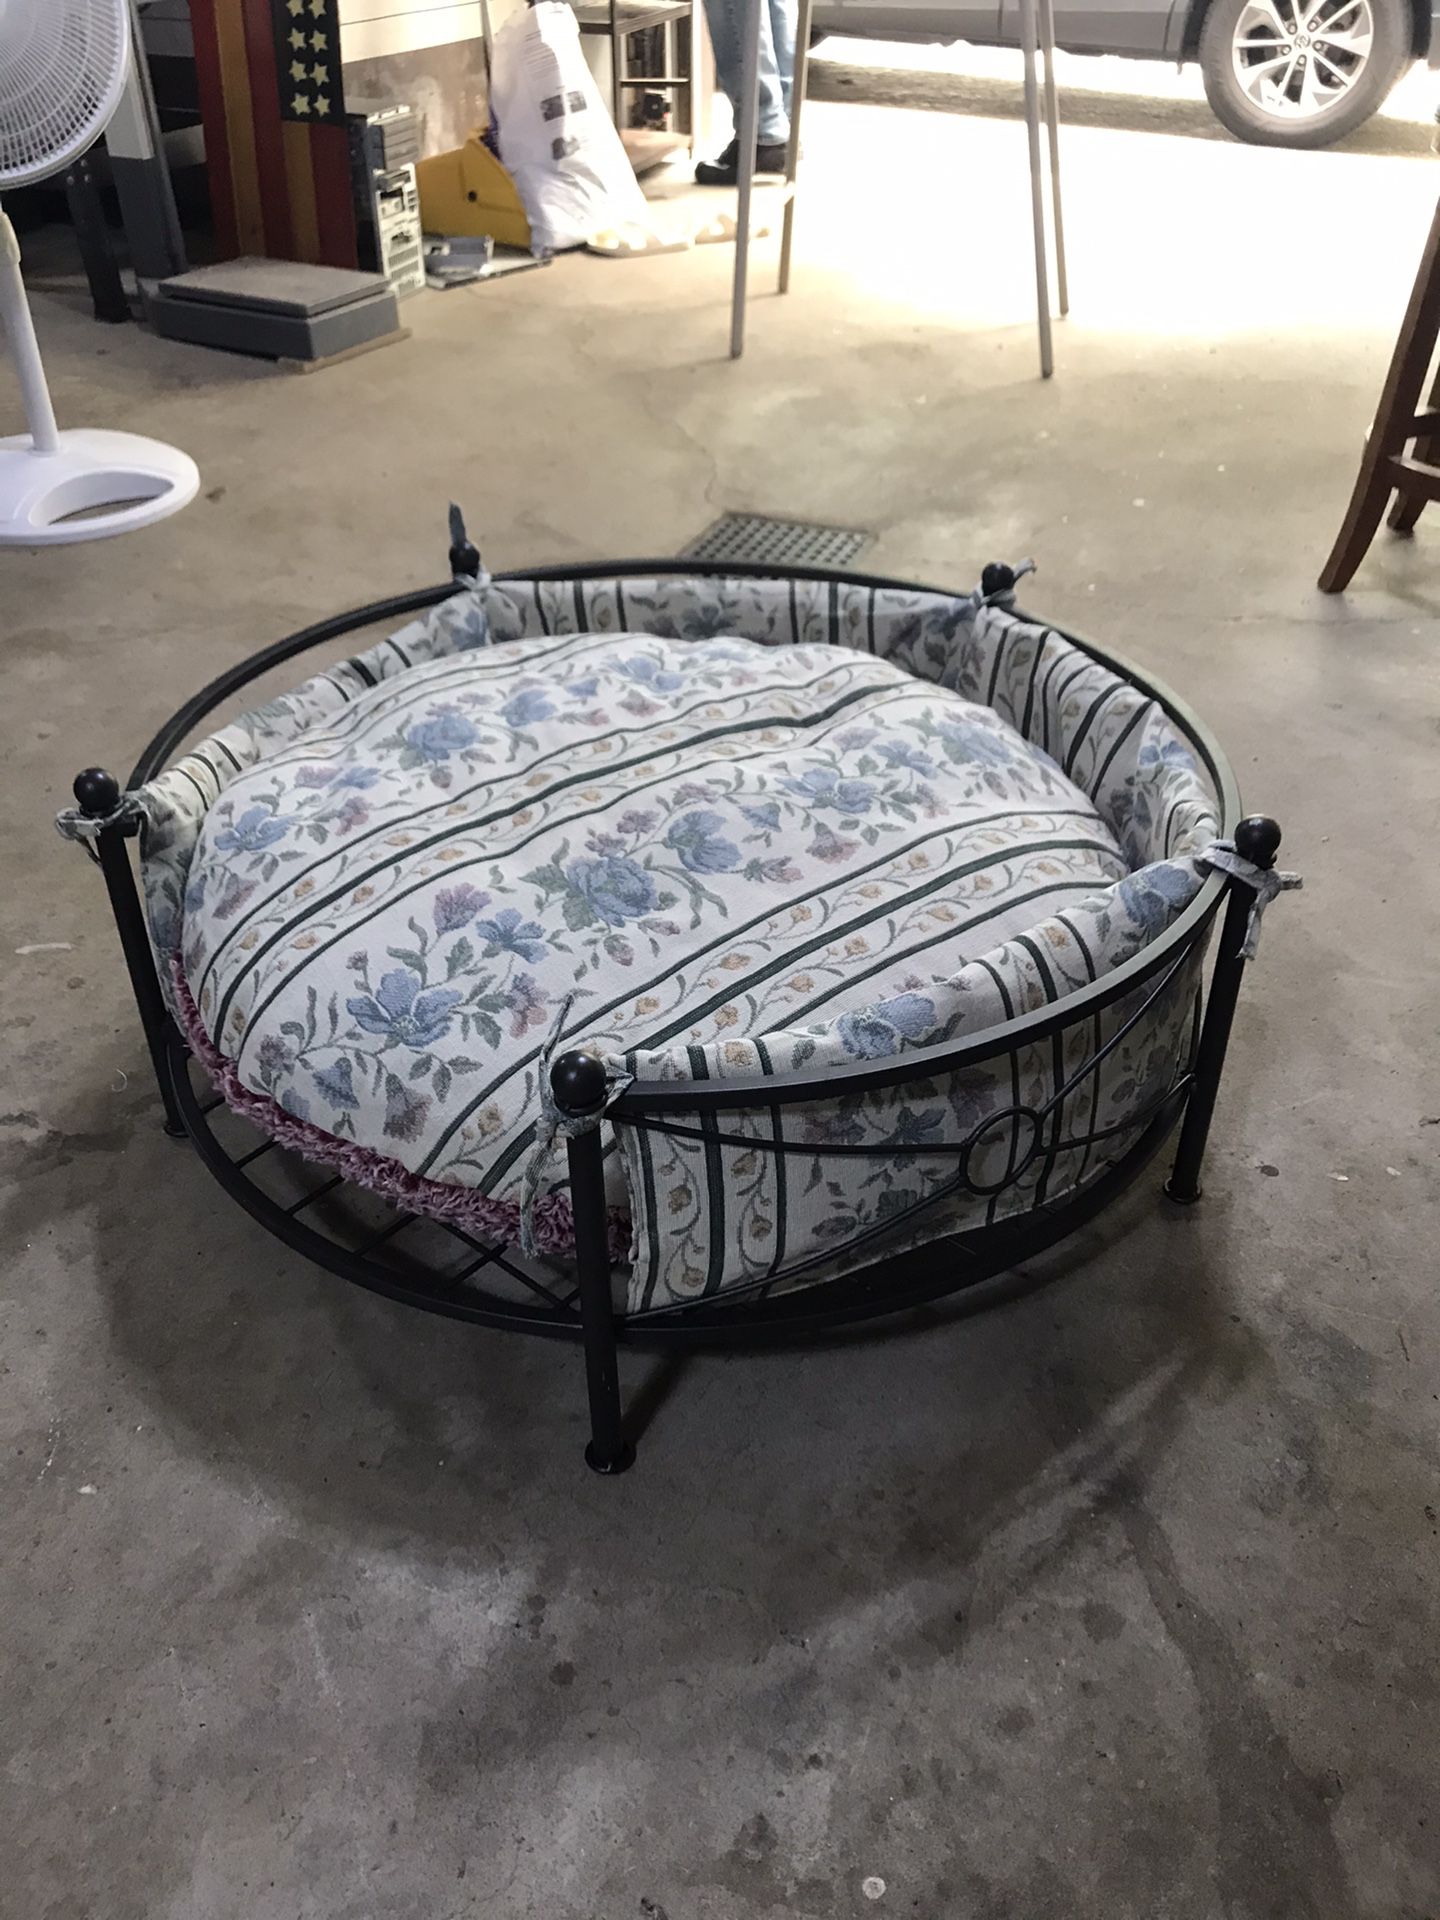 REDUCED. Large cozy Dog Bed